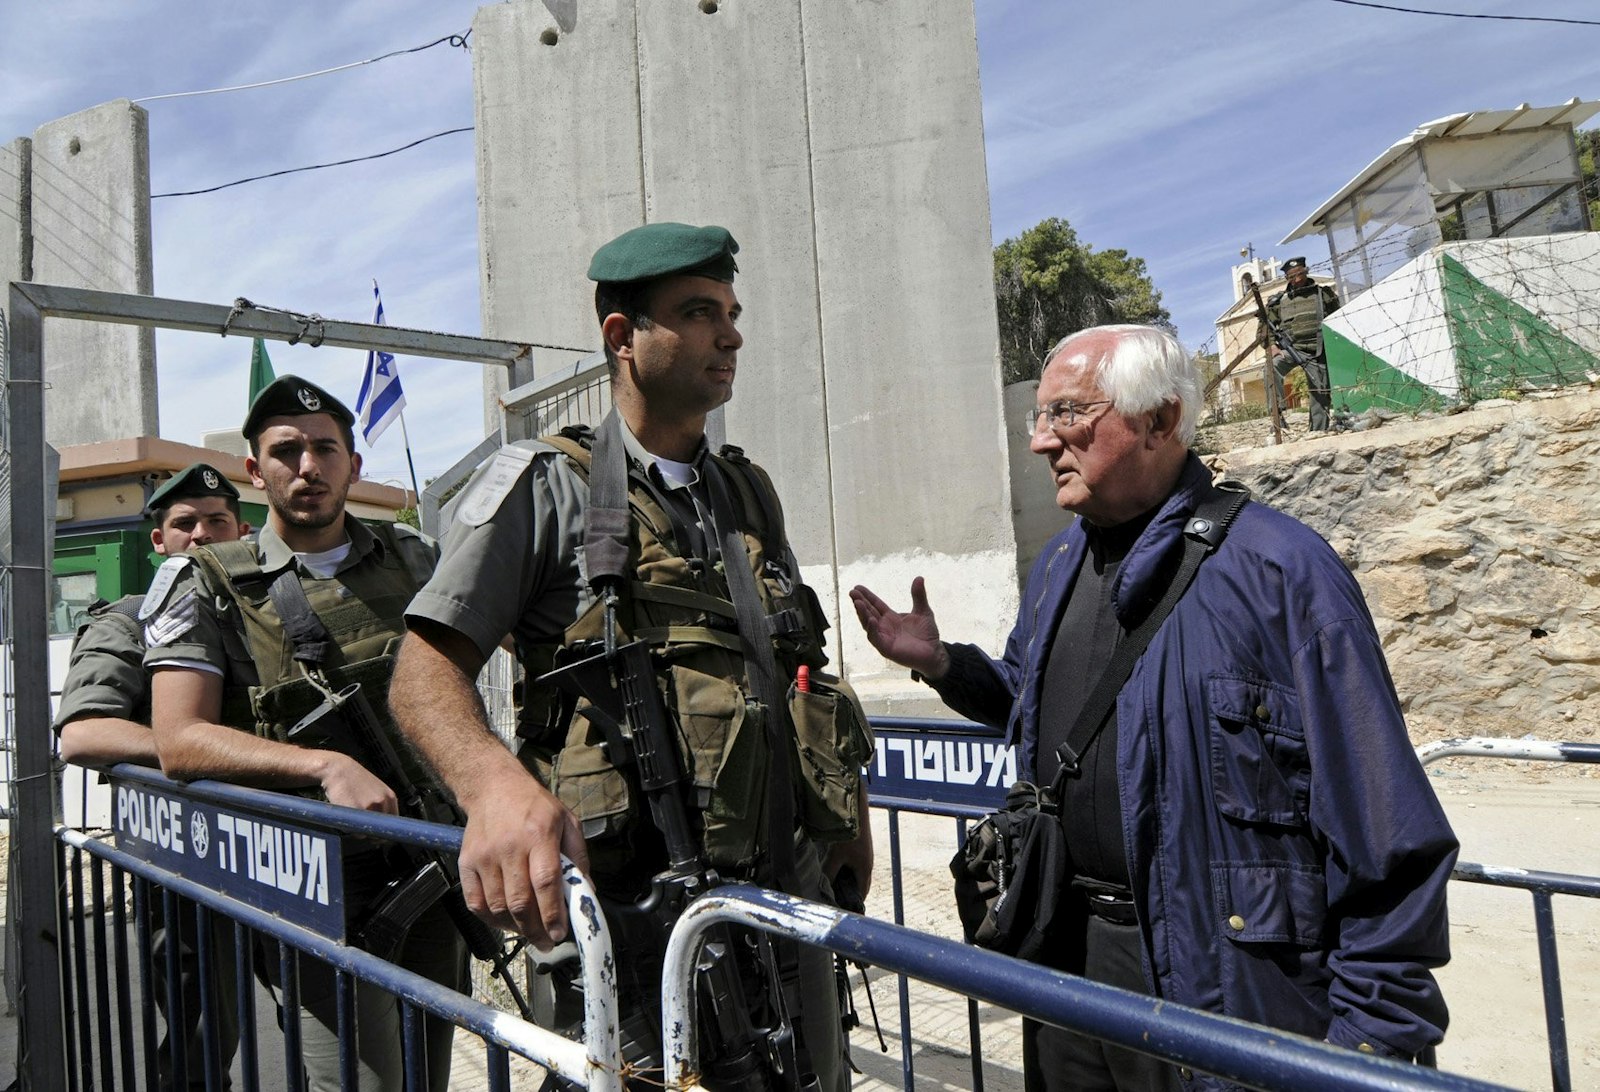 Bishop Gumbleton tries to persuade Israeli border police to let Palestinians and international visitors pass through the gate to Jerusalem during a Palm Sunday procession from Lazarus' Tomb in Bethany to the Bethany Gate at the Israeli separation wall in the West Bank on March 16, 2008. (Debbie Hill | CNS photo)